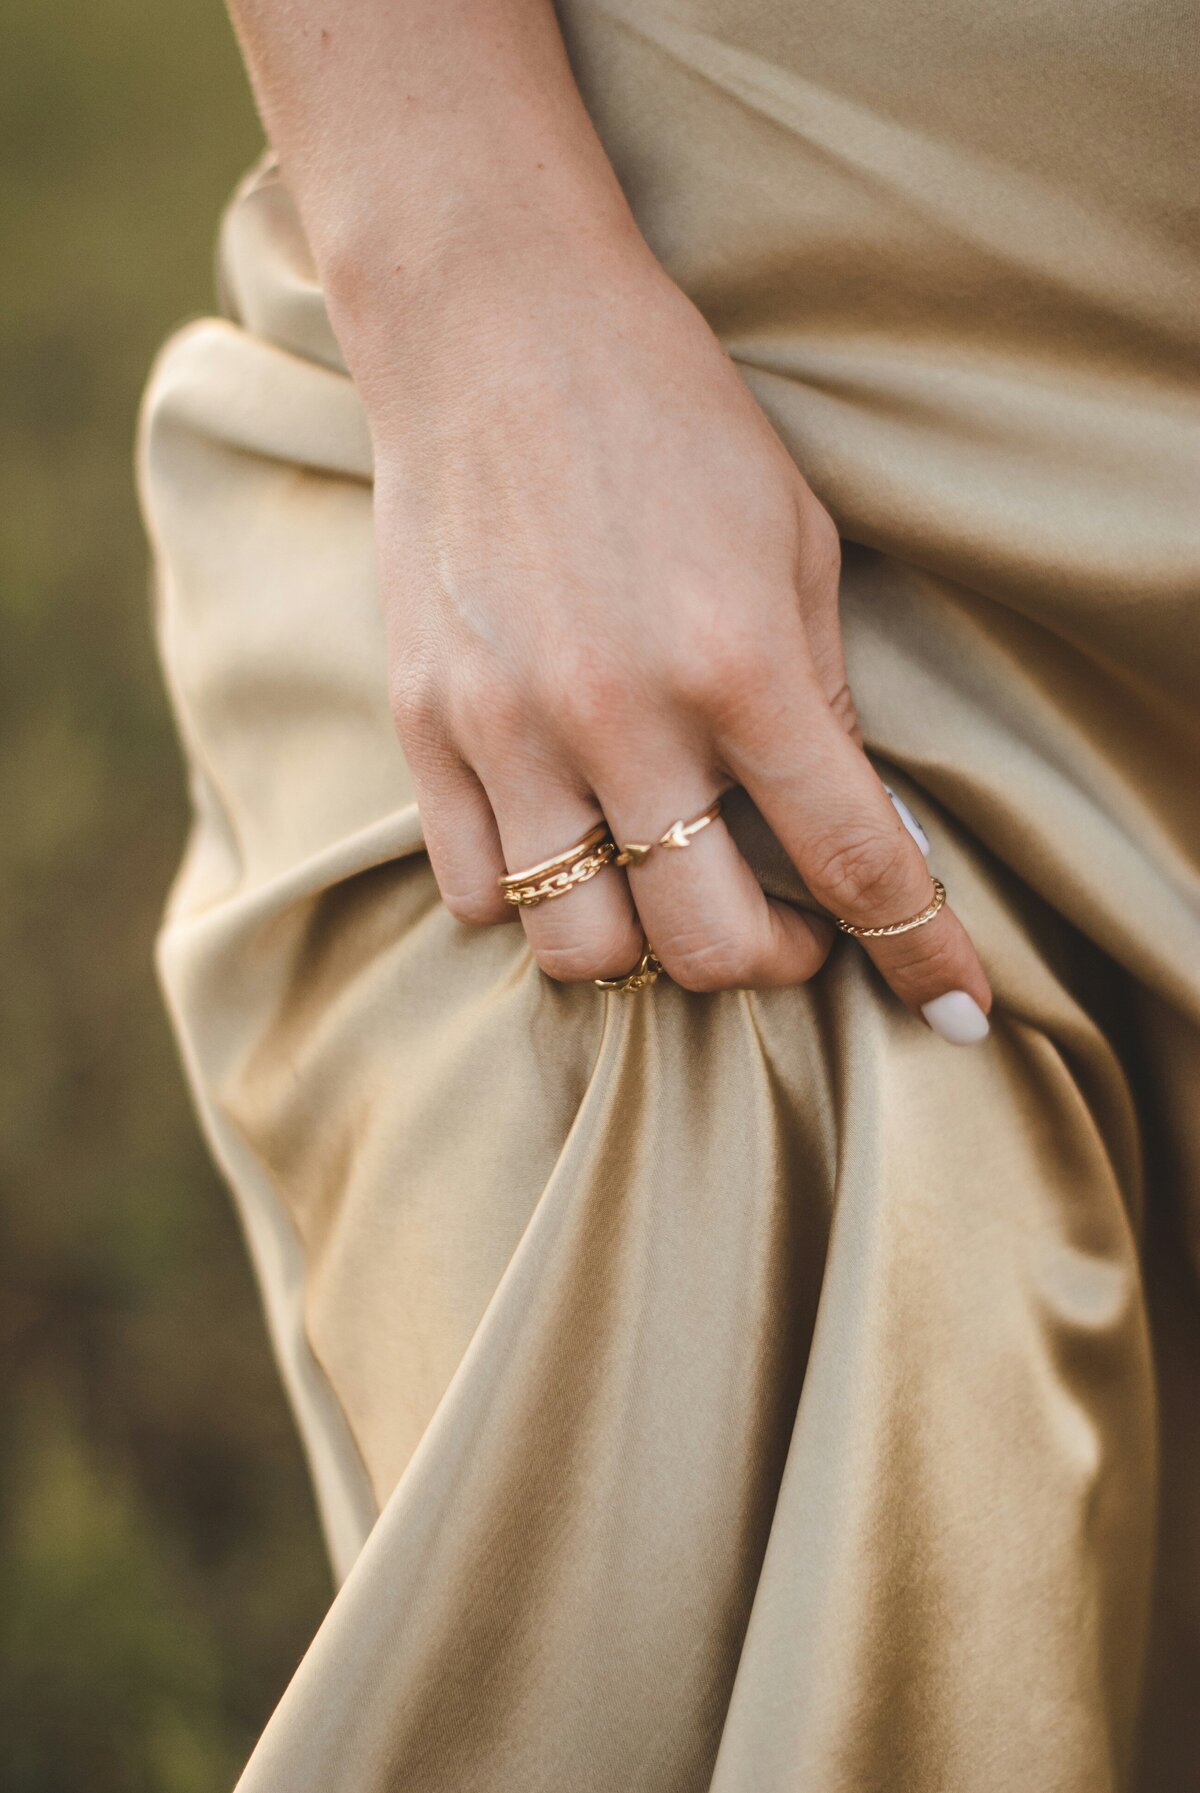 Woman's hand wearing gold jewelry